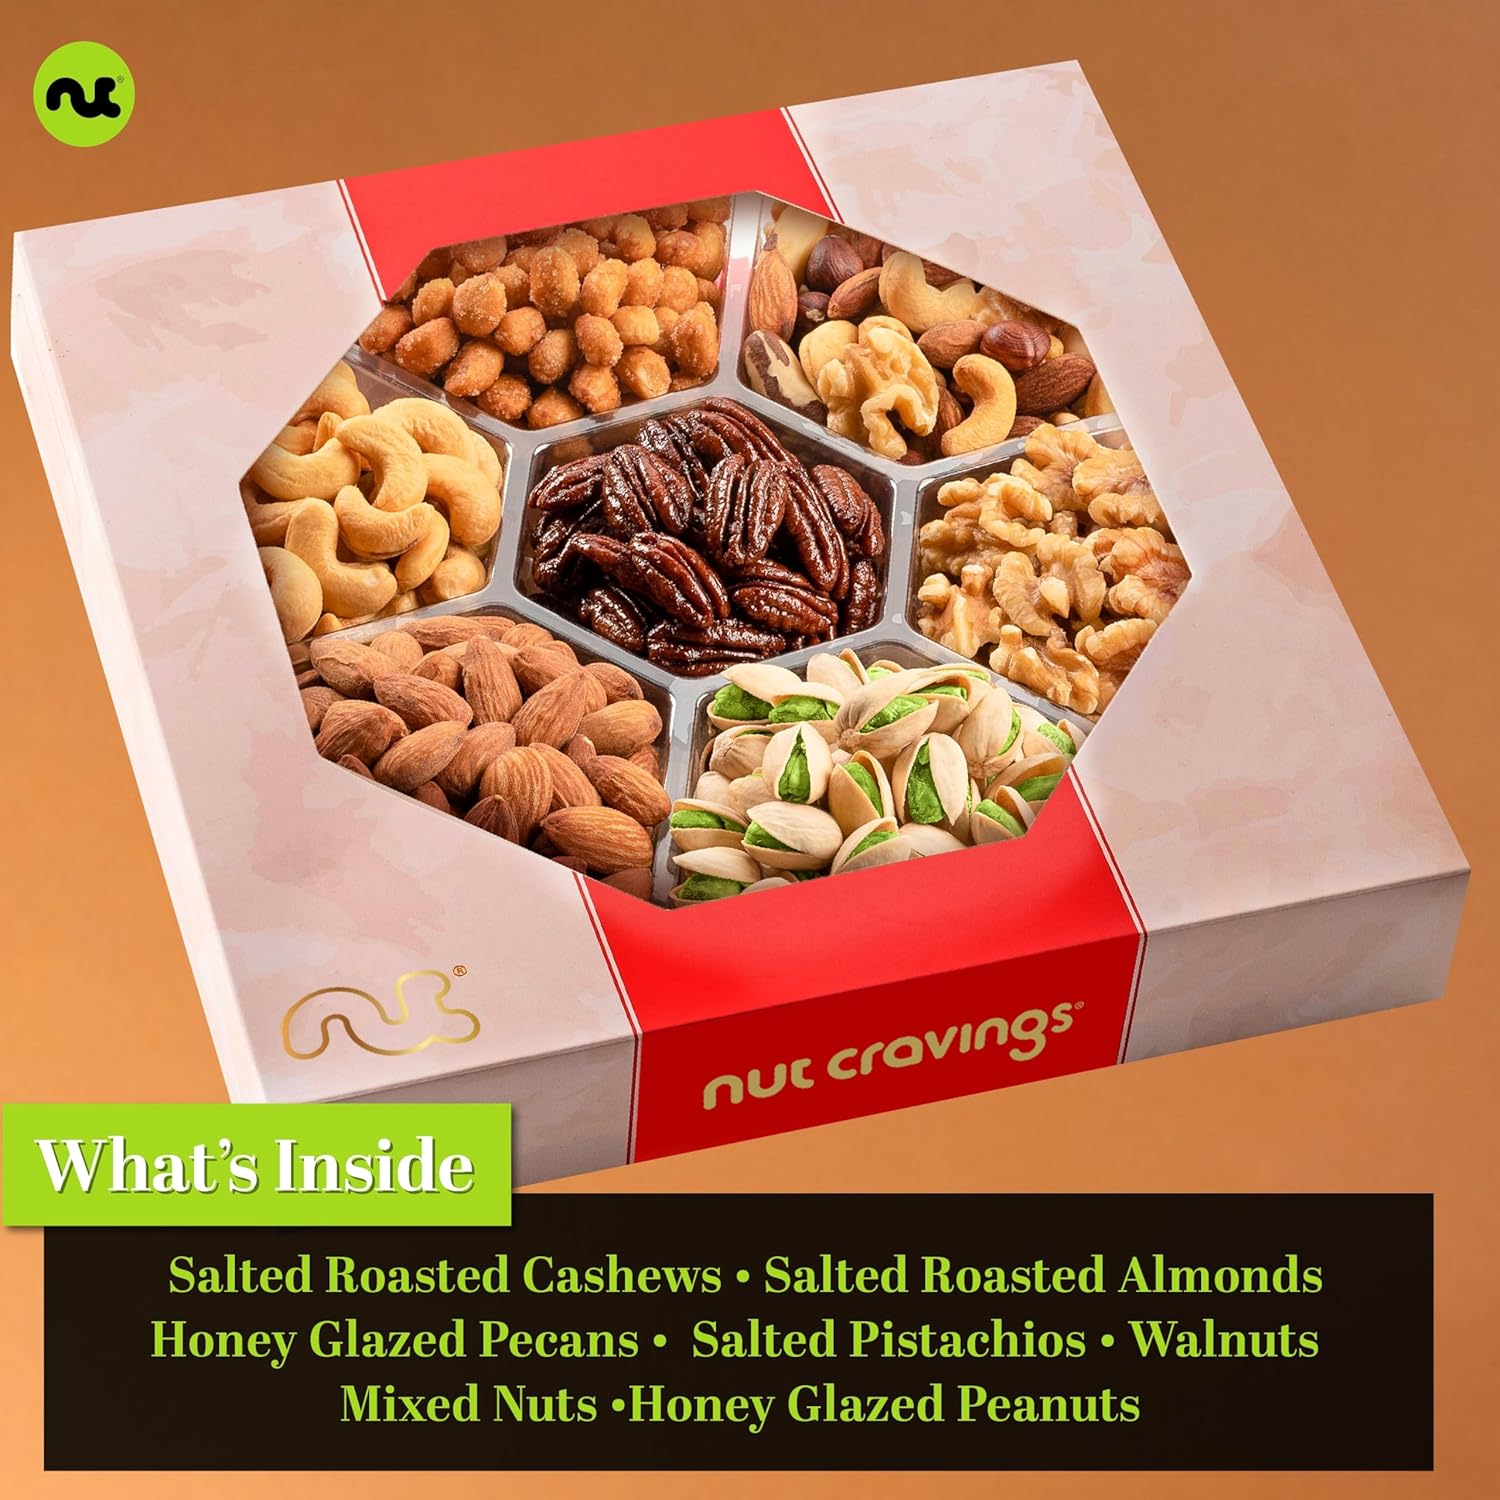 Nut Cravings Gourmet Collection - Mothers Day Mixed Nuts Gift Basket in Red Gold Box (7 Assortments, 1 LB) Arrangement Platter, Birthday Care Package - Healthy Kosher USA Made : Grocery & Gourmet Food